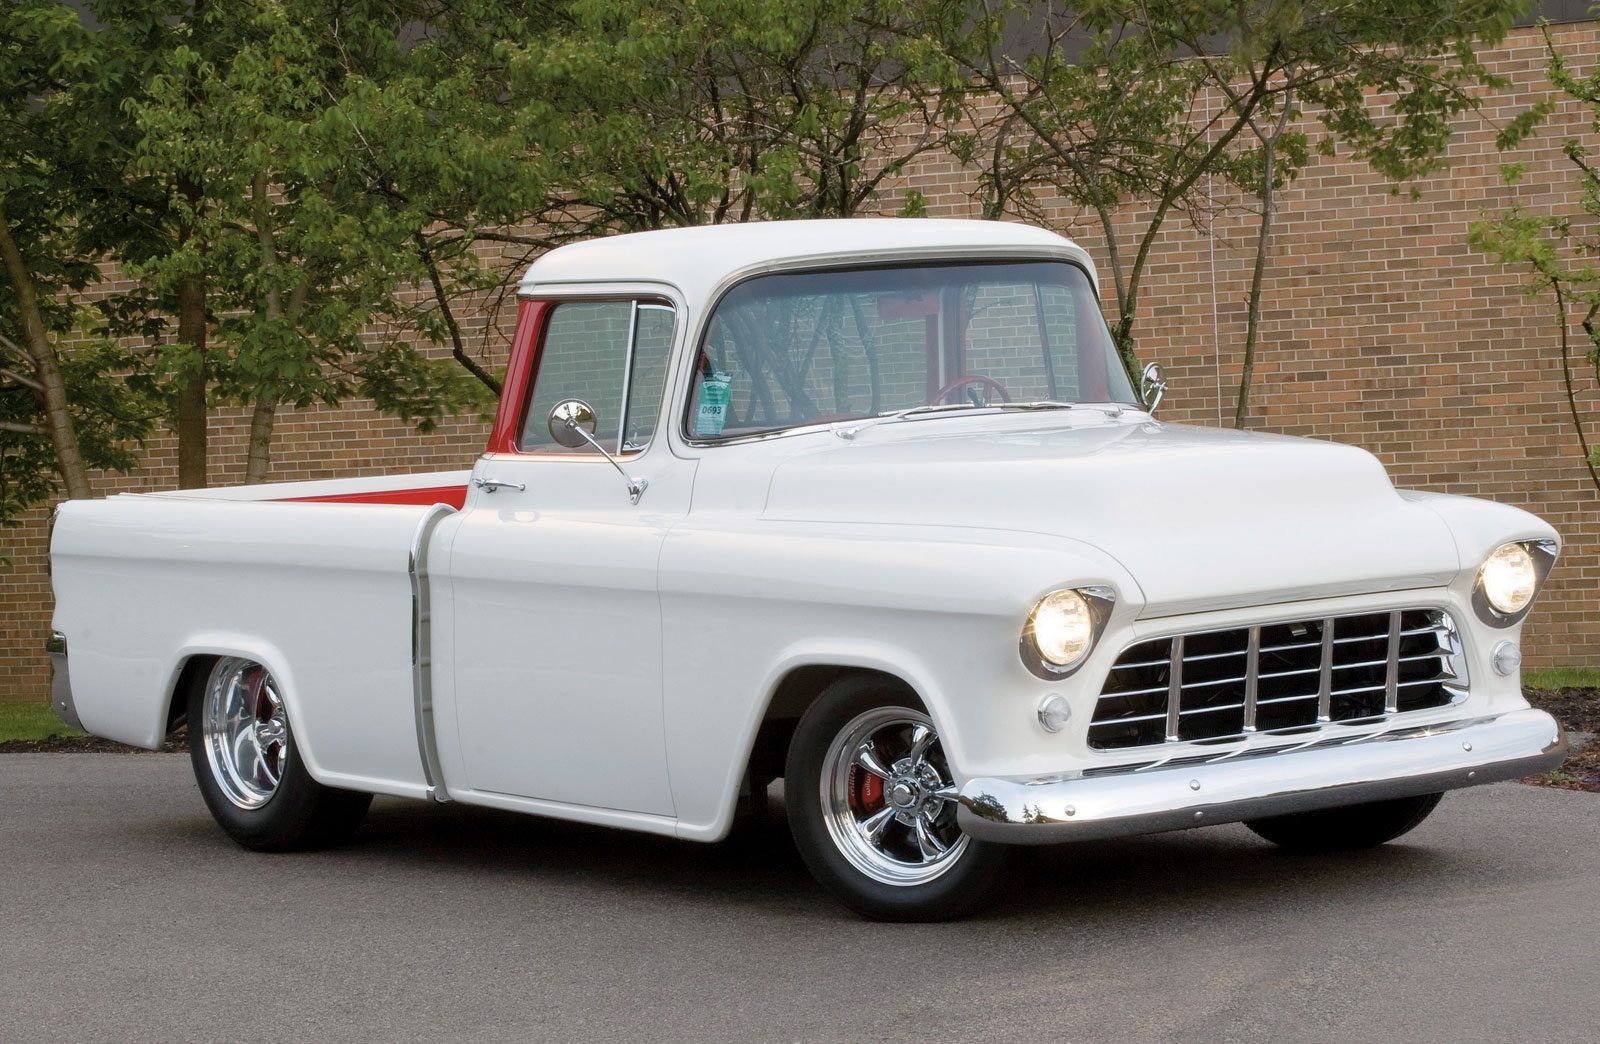 Chevy Series, Surprise the collector in your life with this U. Mint Two Qua...